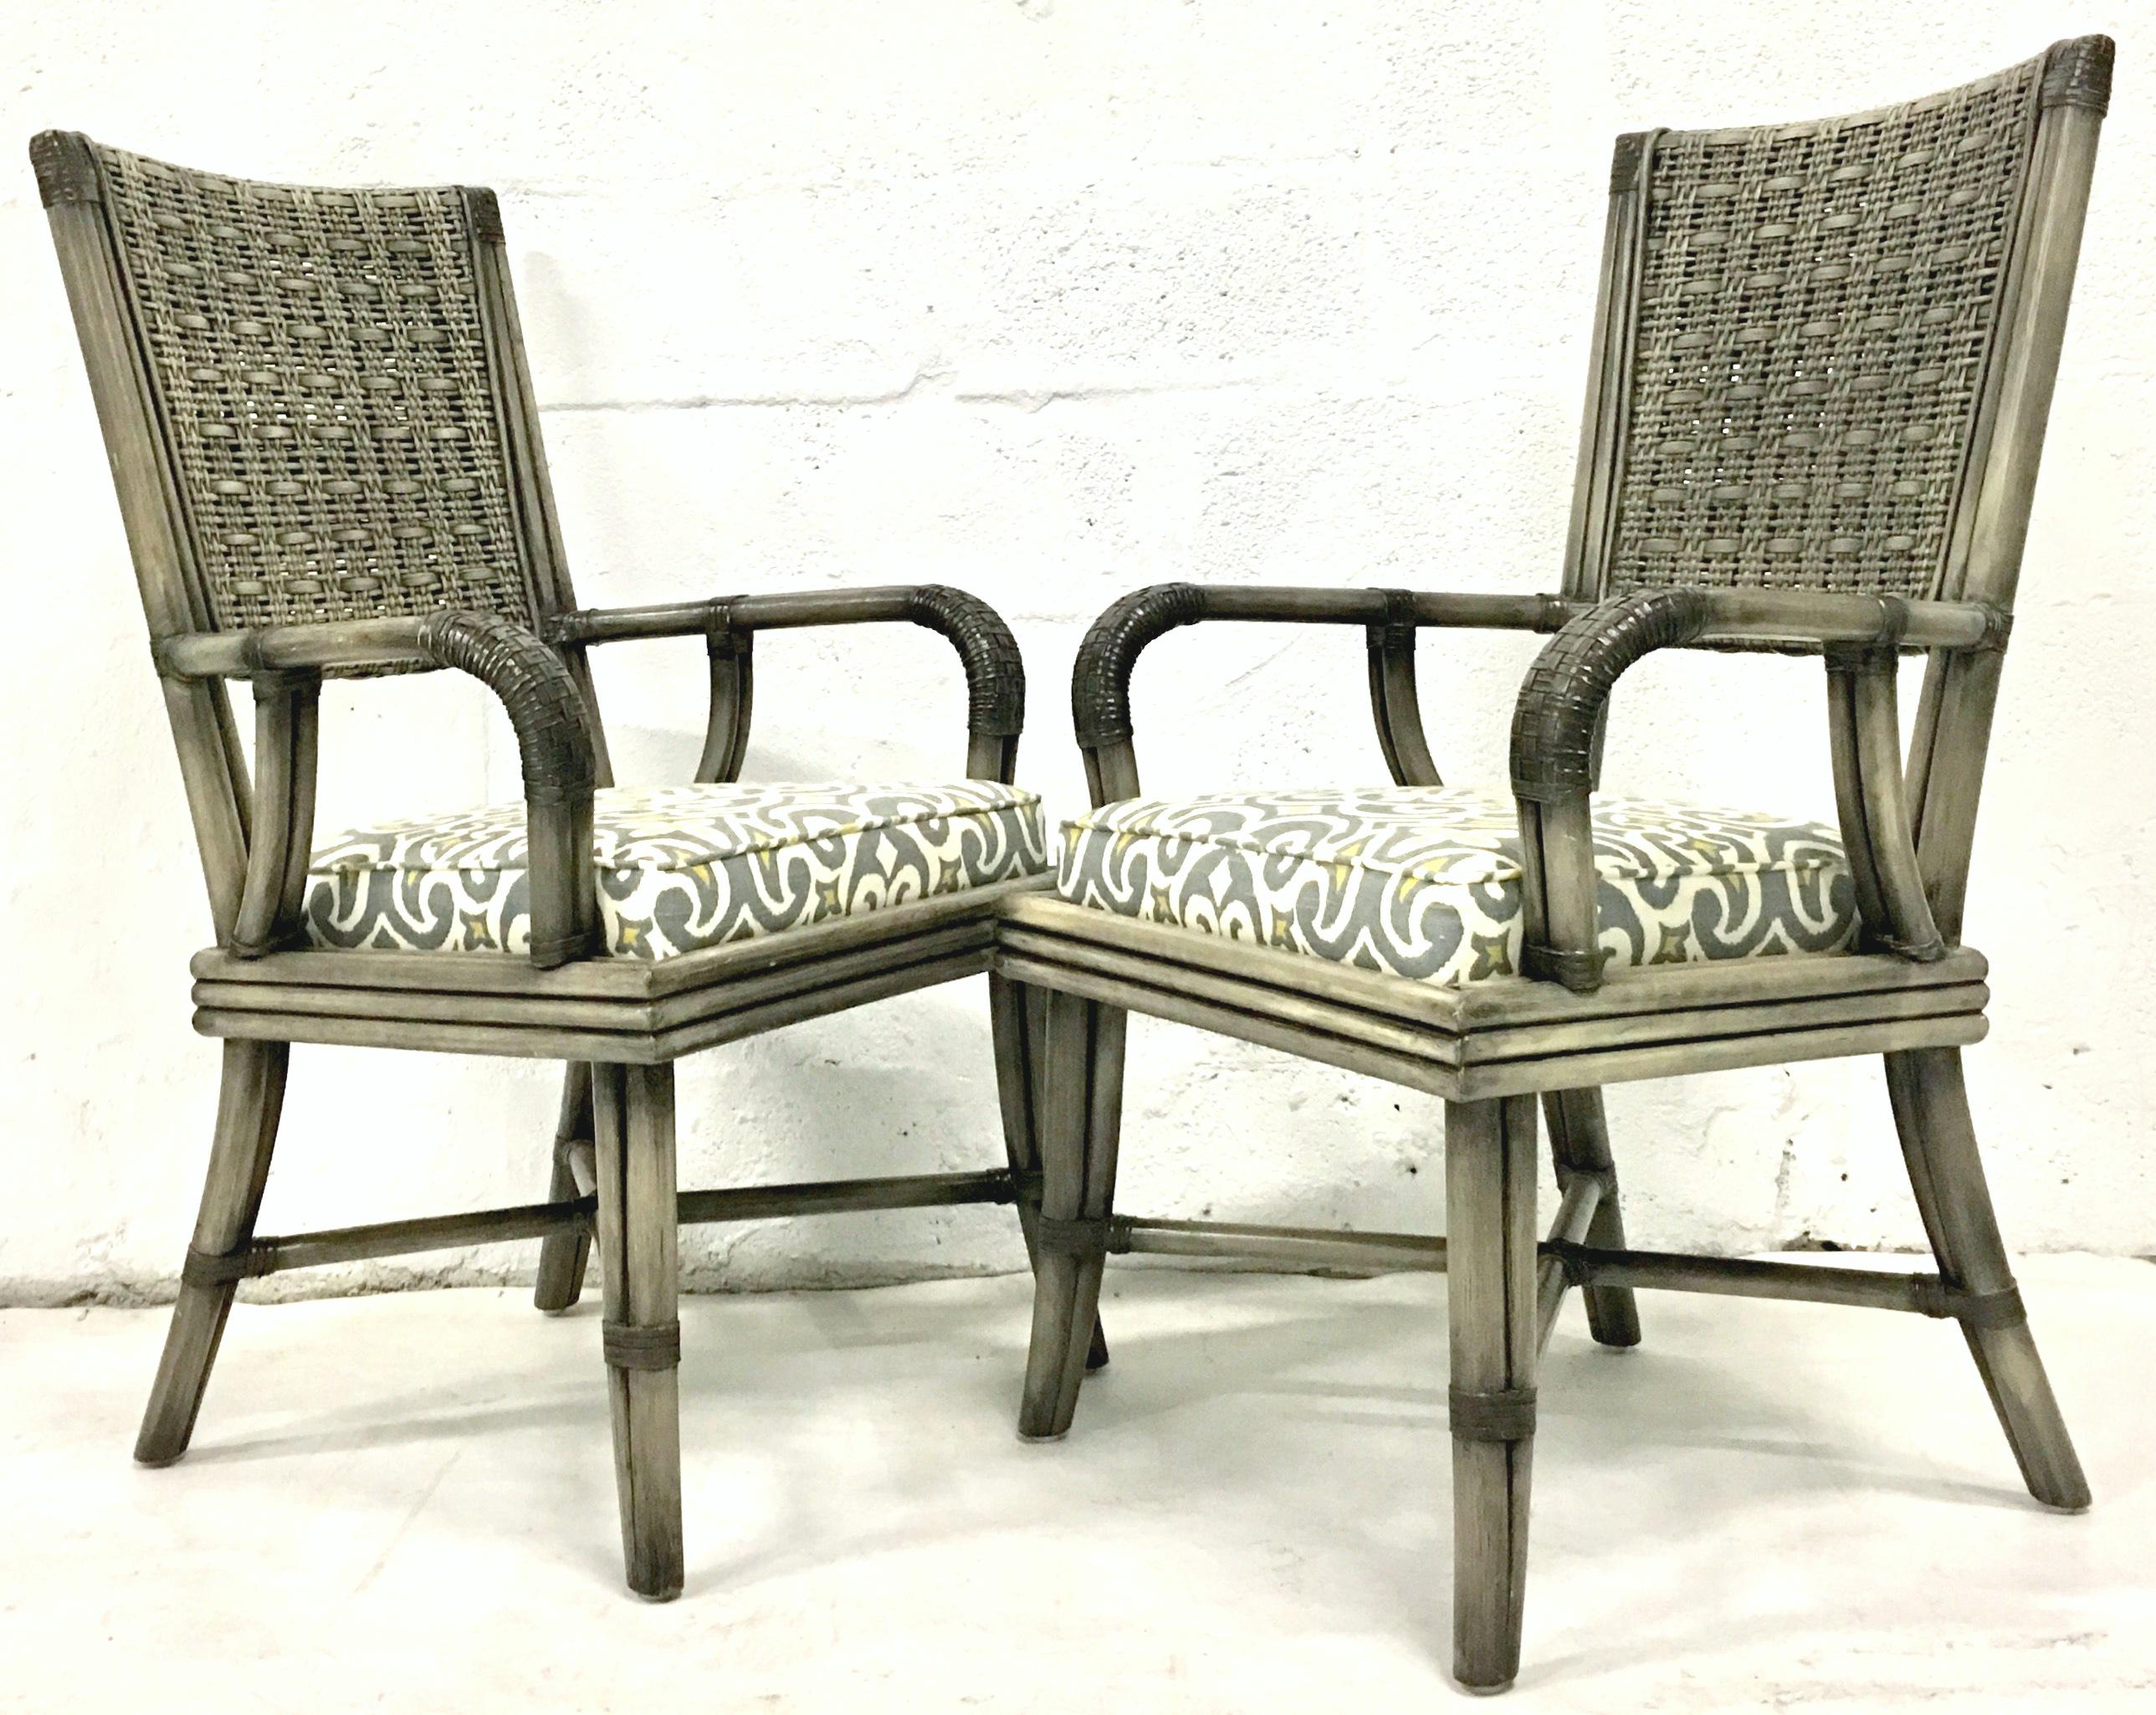 Contemporary 21st Century Pair of Rattan Upholstered Armchairs by, David Francis For Sale